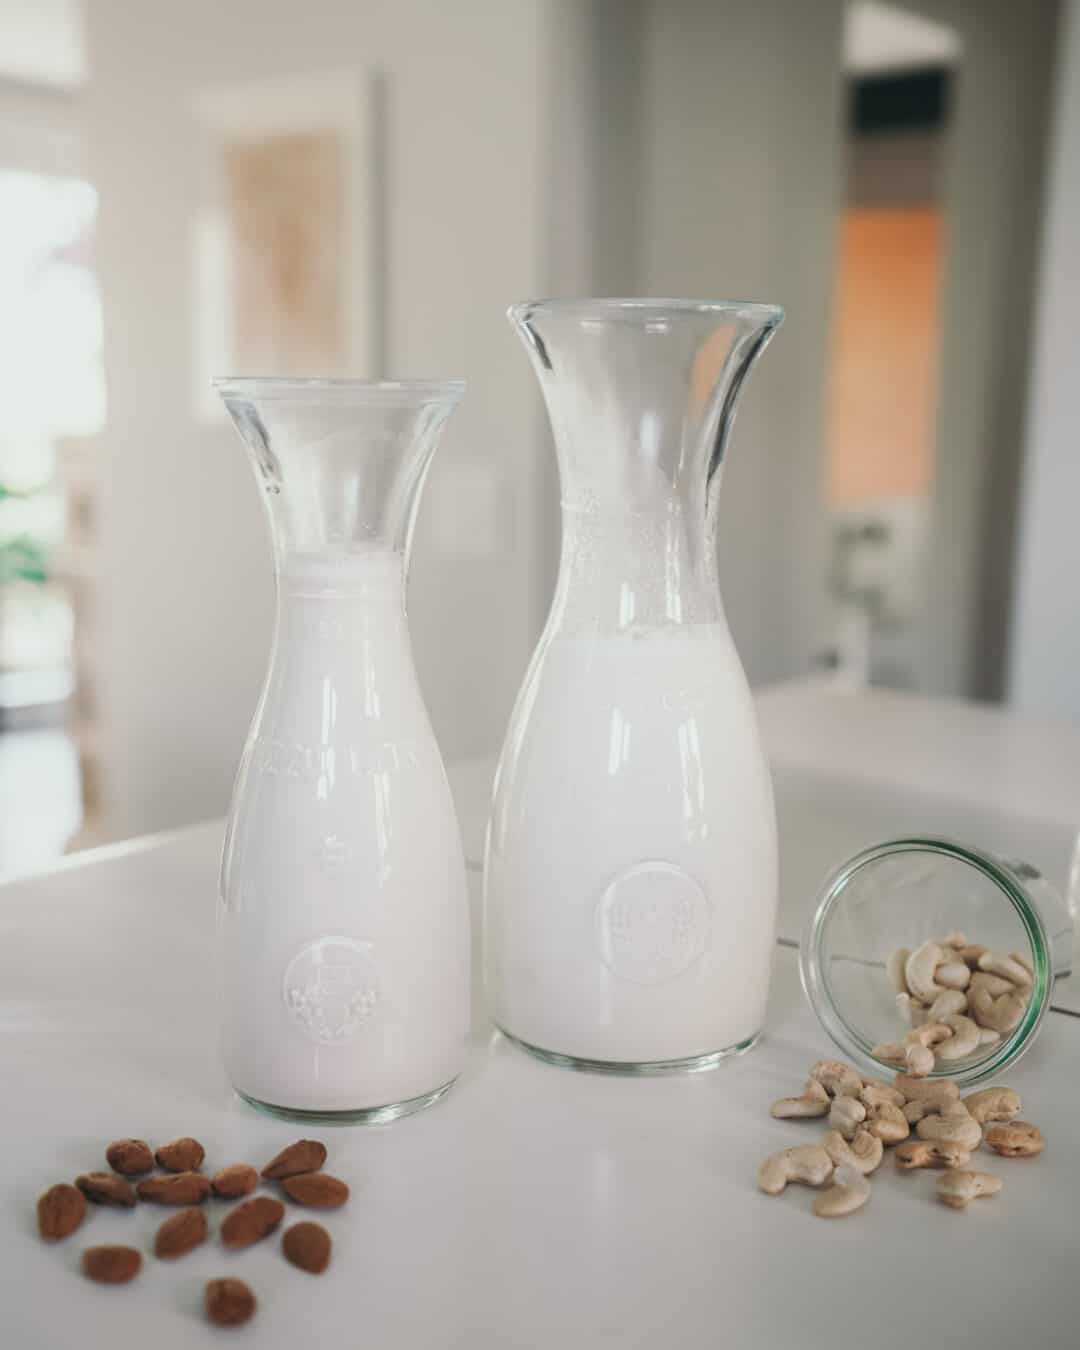 Two Carafes of nut milk